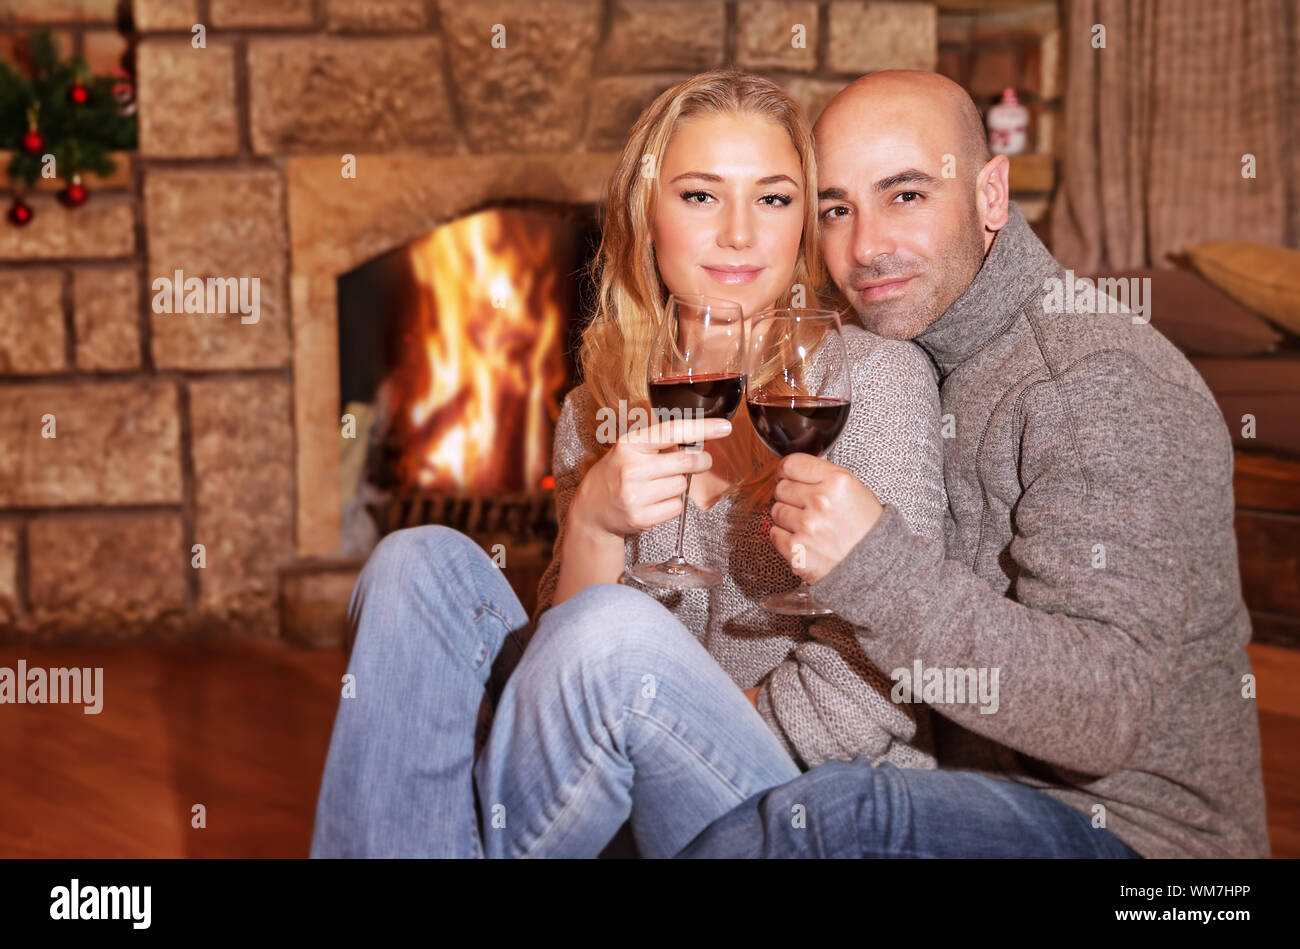 Cute couple on romantic date, beautiful woman with handsome man sitting near fireplace and drinking wine, celebrating Christmas holidays Stock Photo